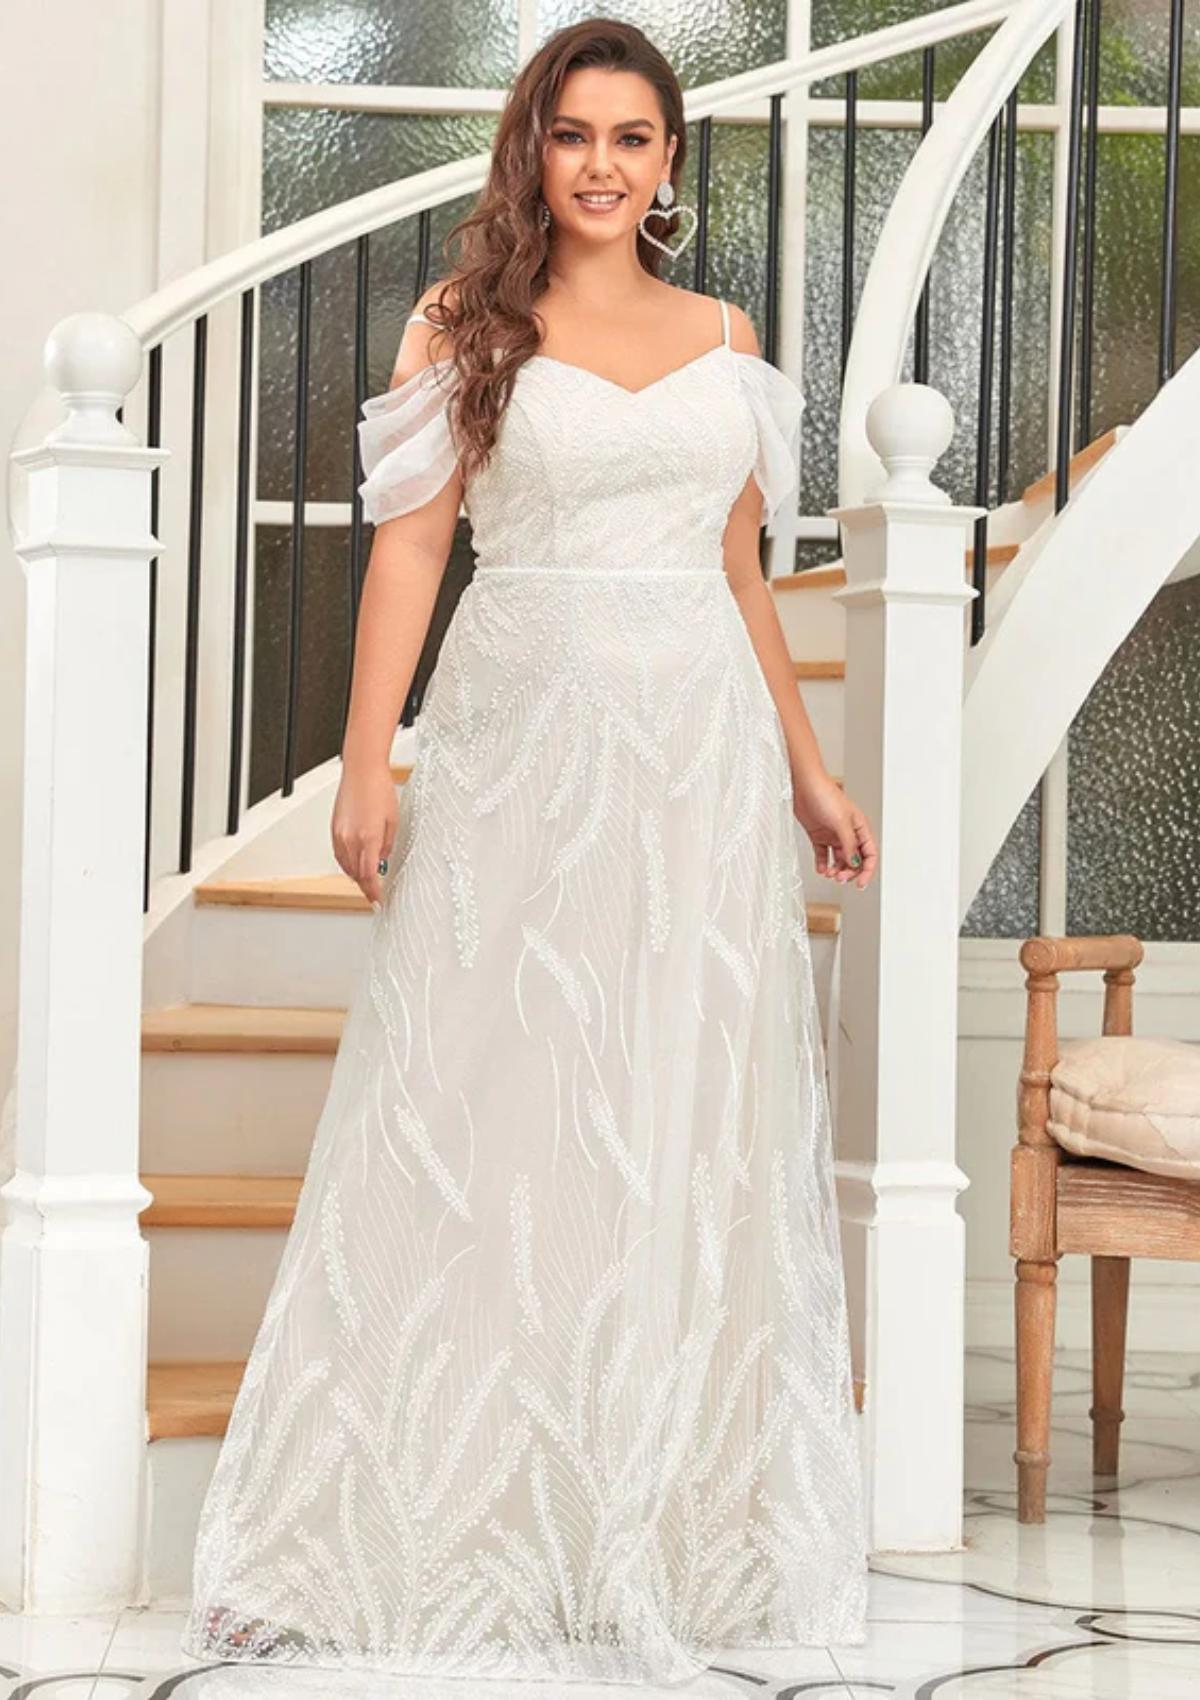 Cheap Wedding Dresses: 45 Affordable High Street Wedding Dresses -  hitched.co.uk